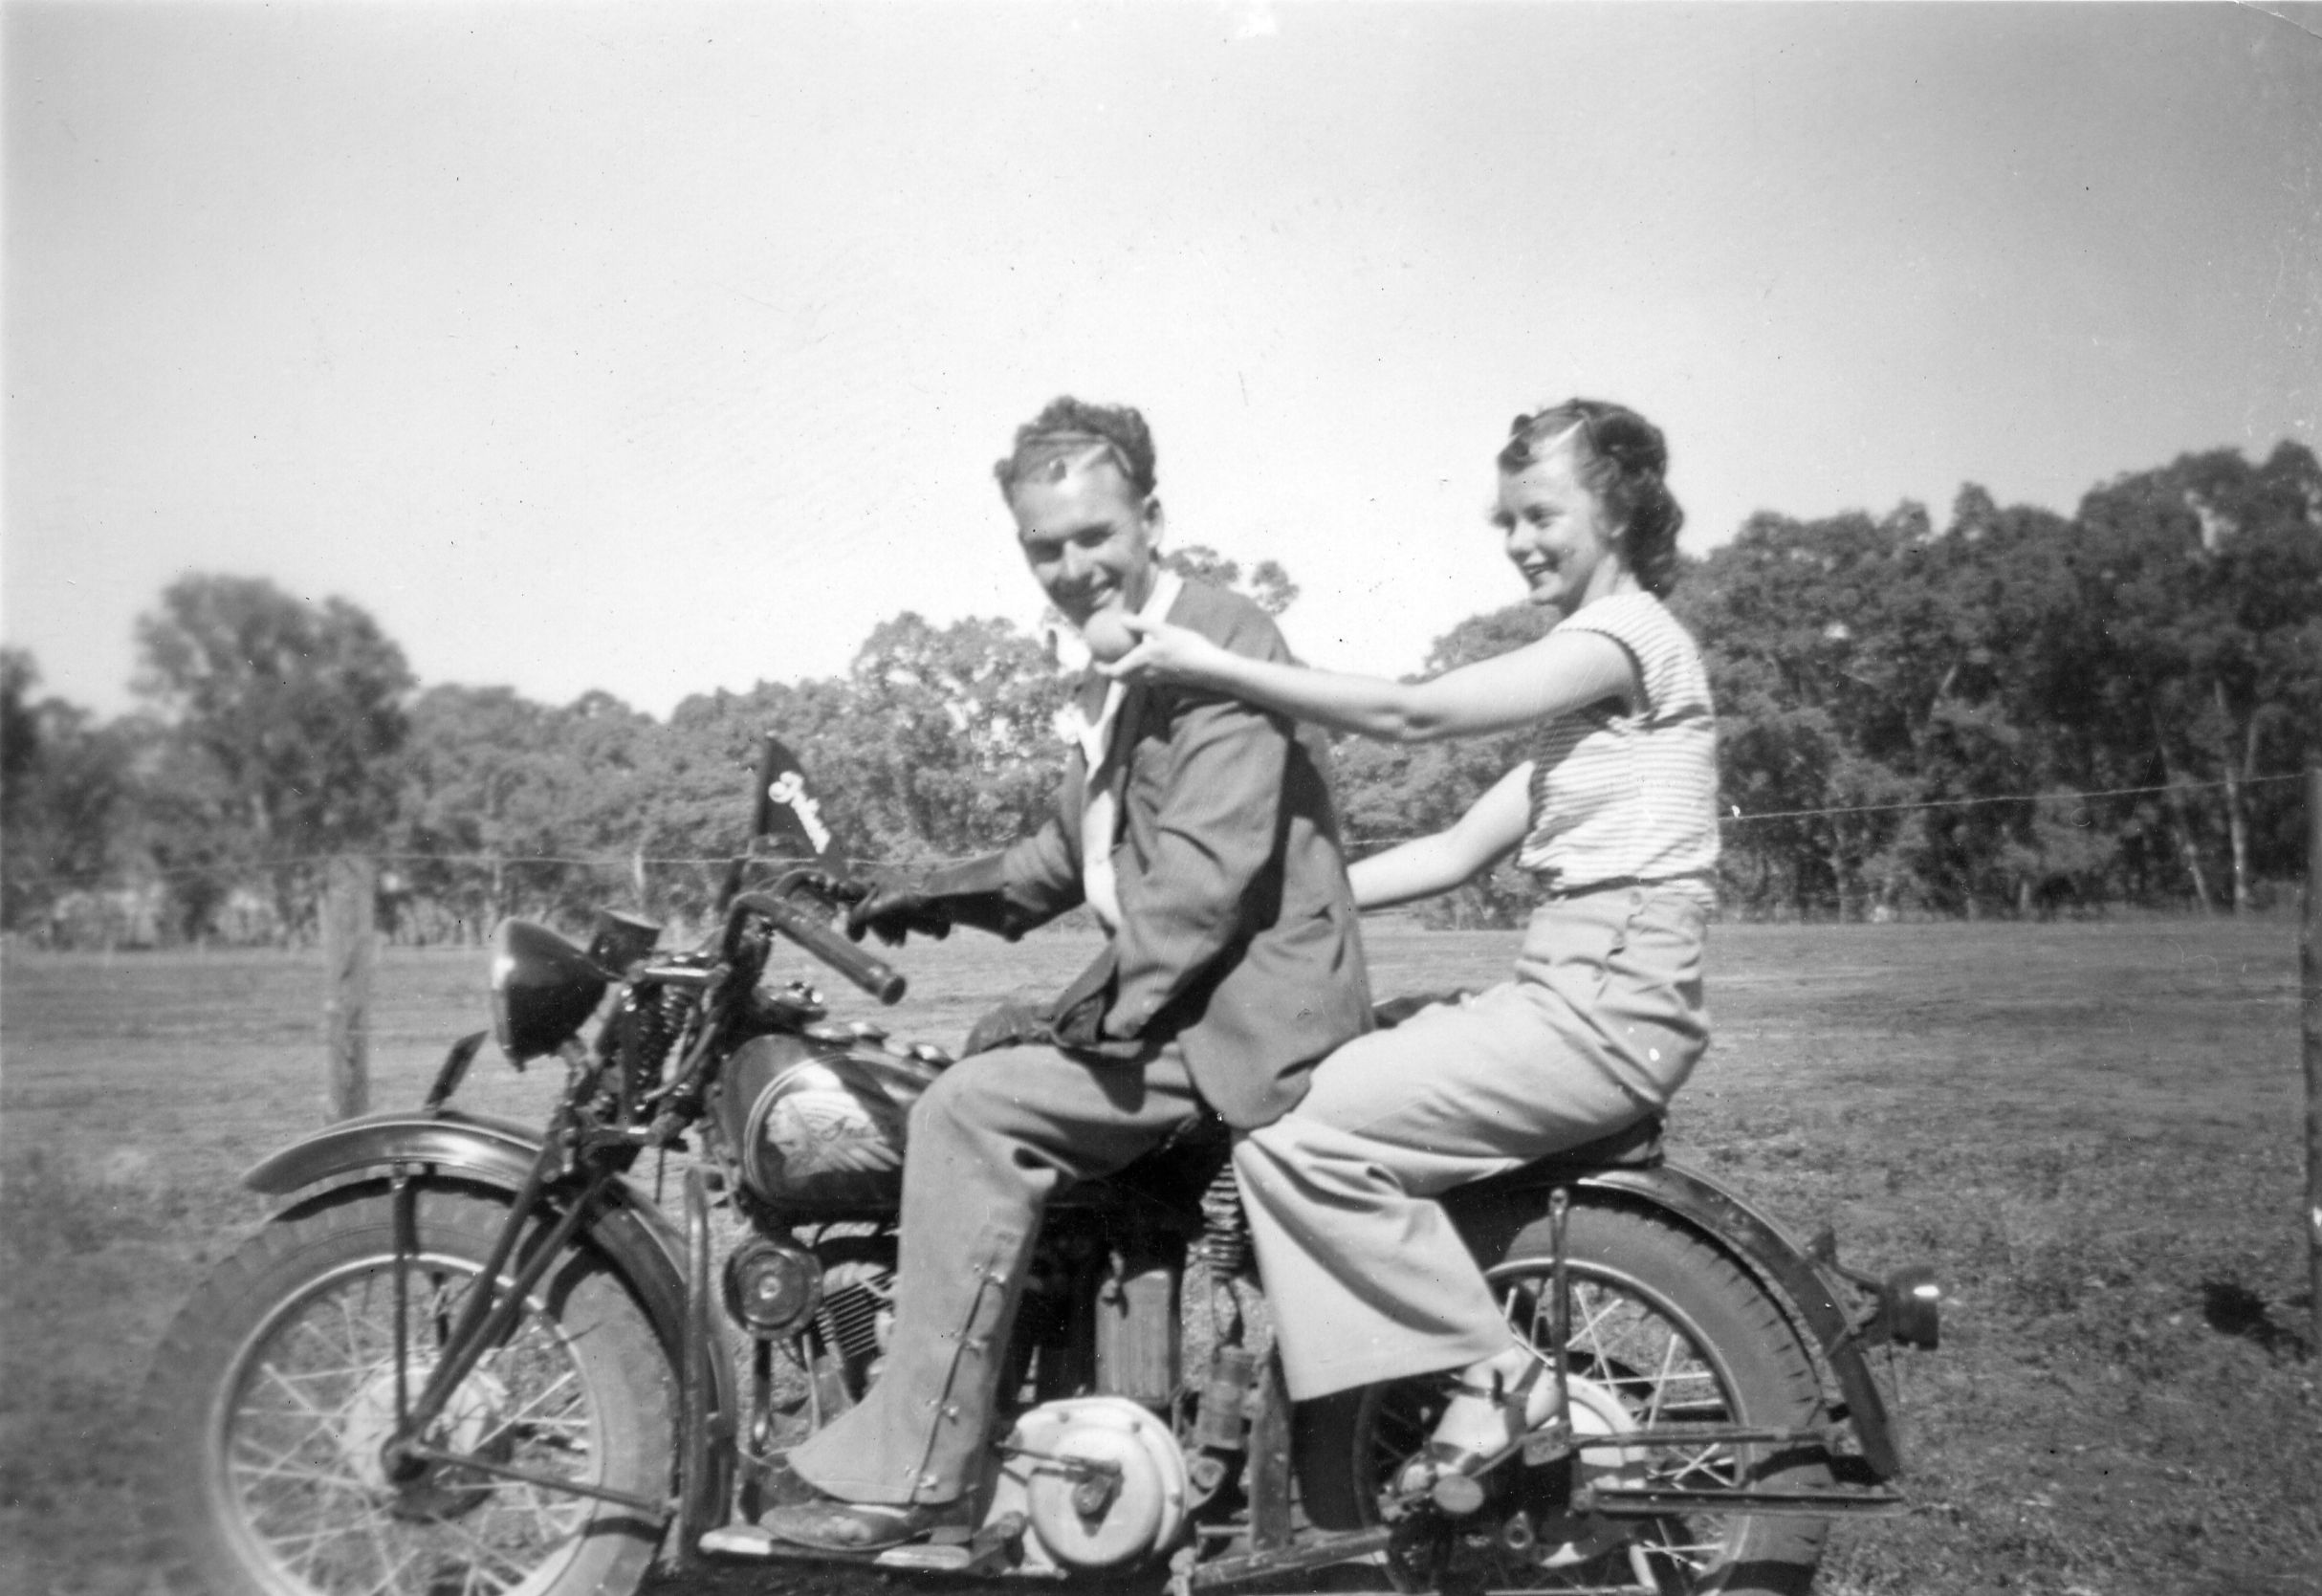 Bill and Beryl motorbike riding prior to their marriage.